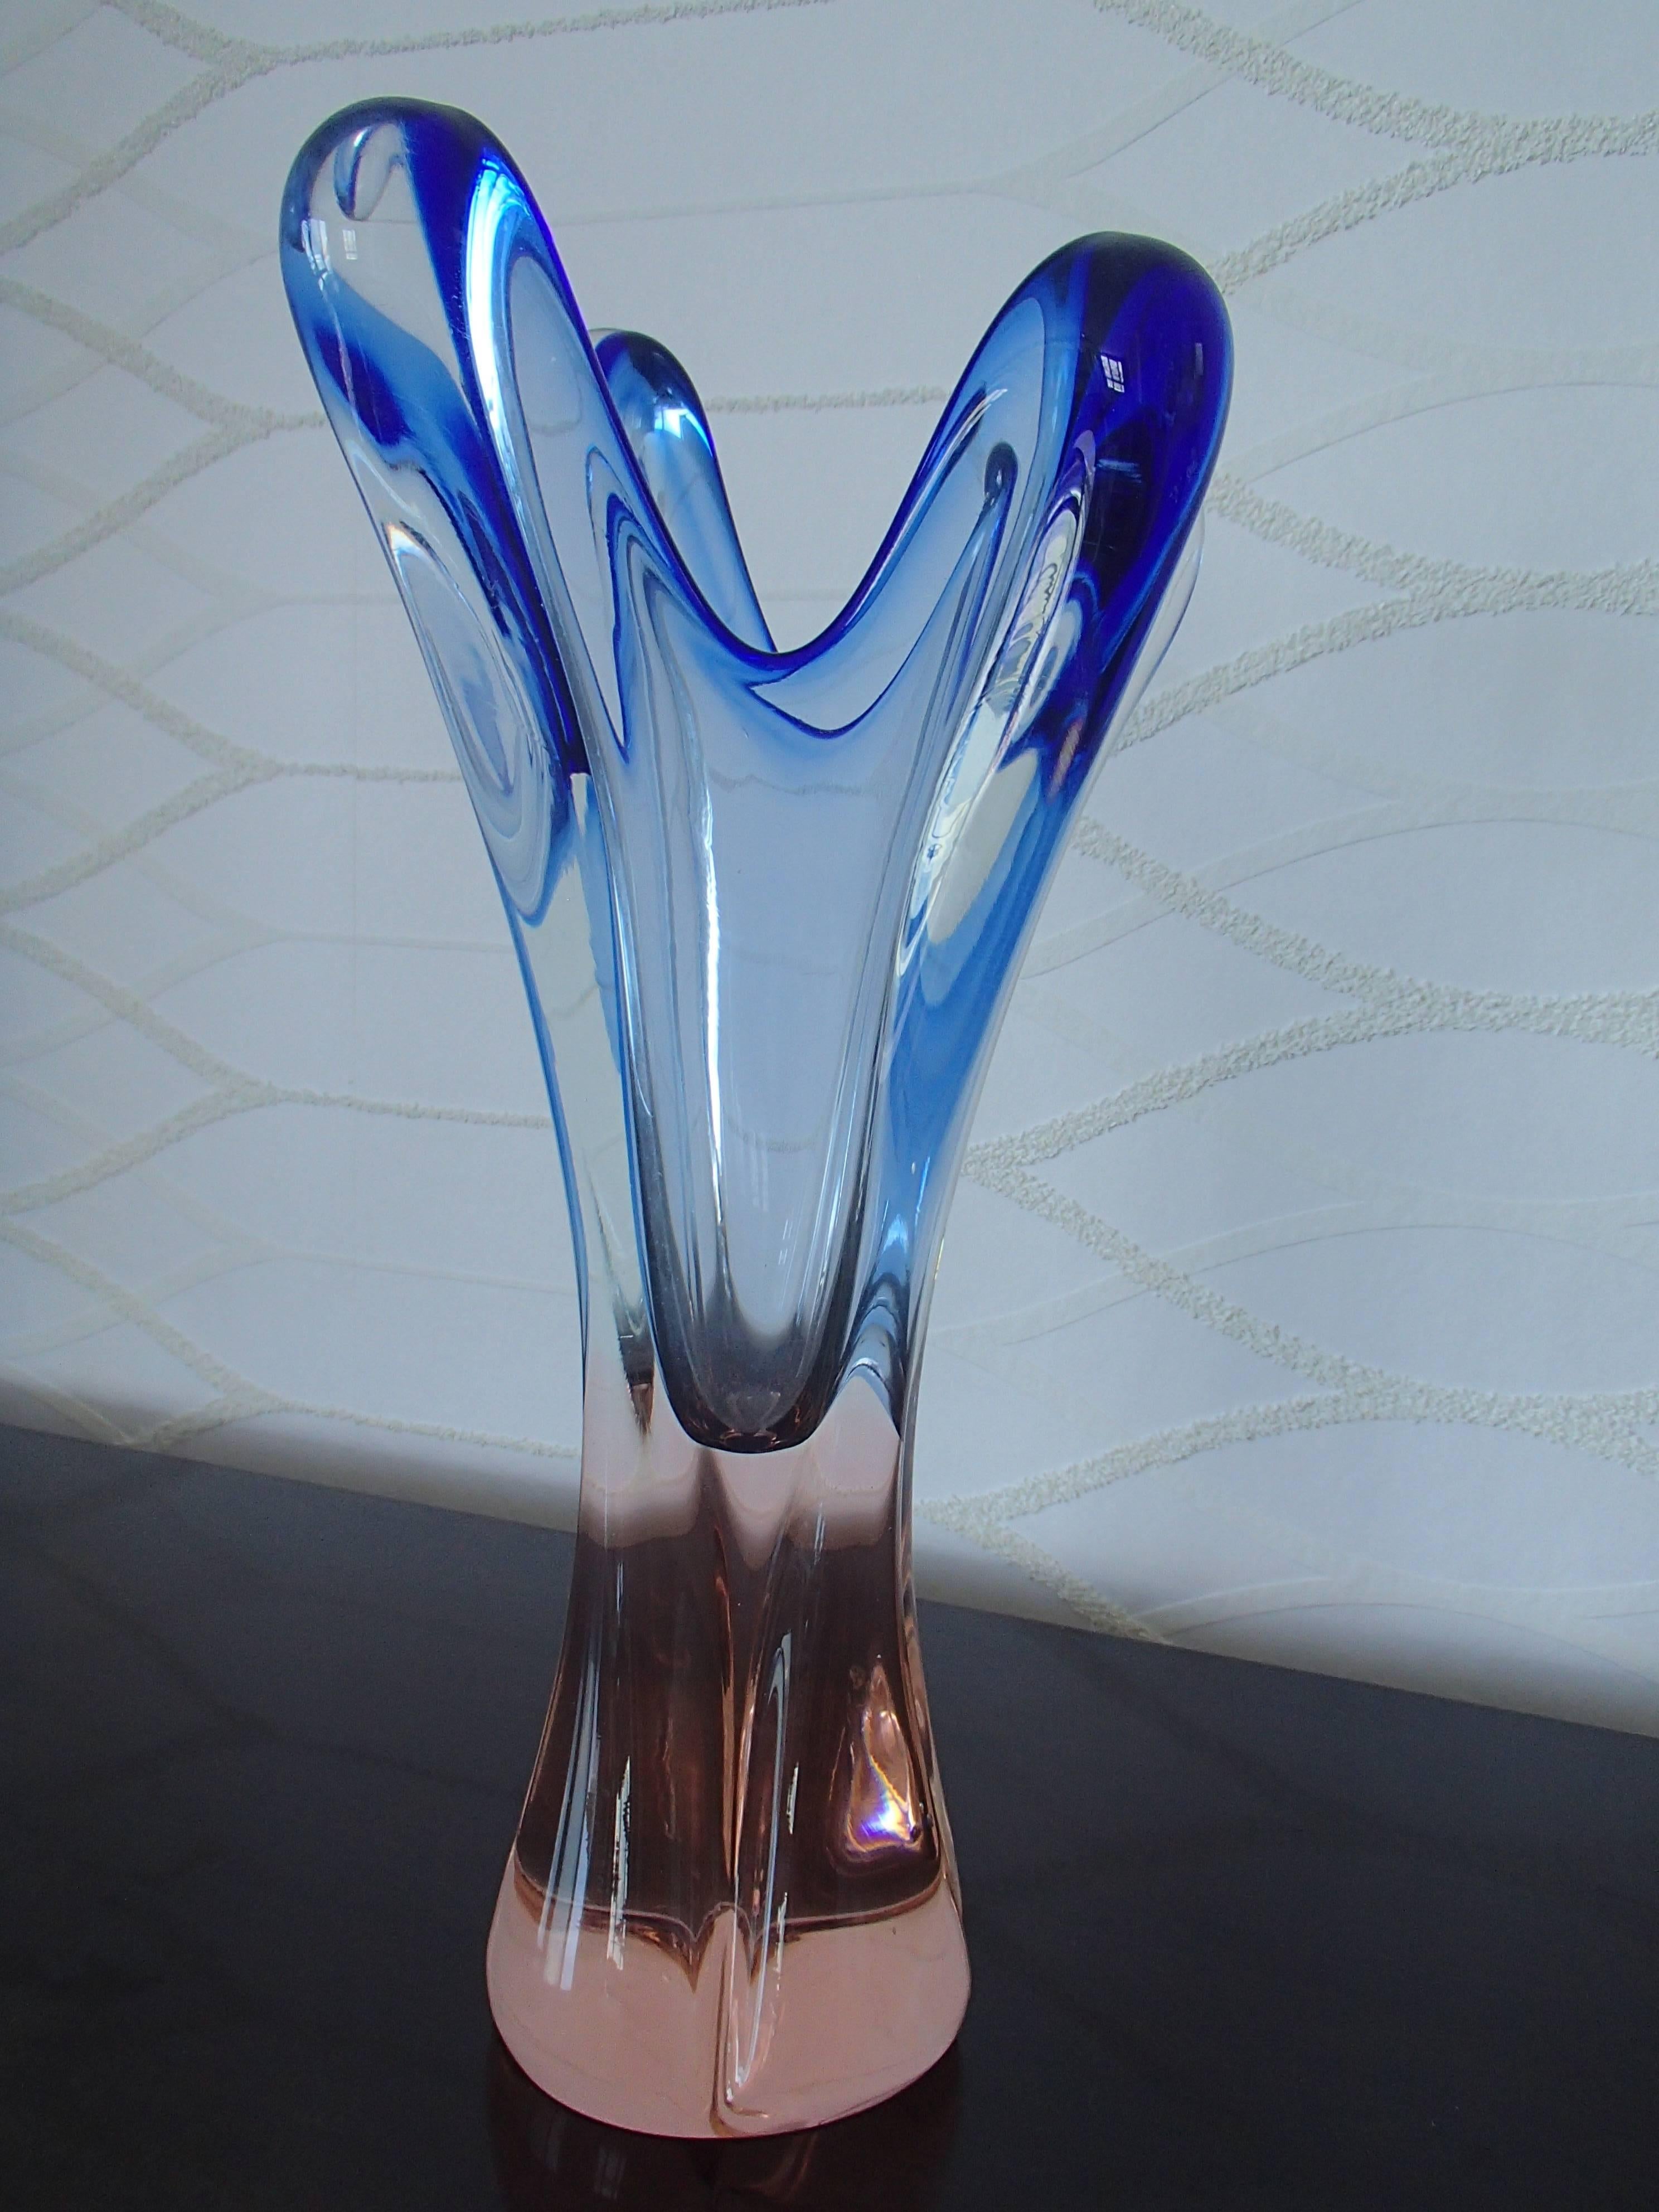 Midcentury Murano vase pink and blue.